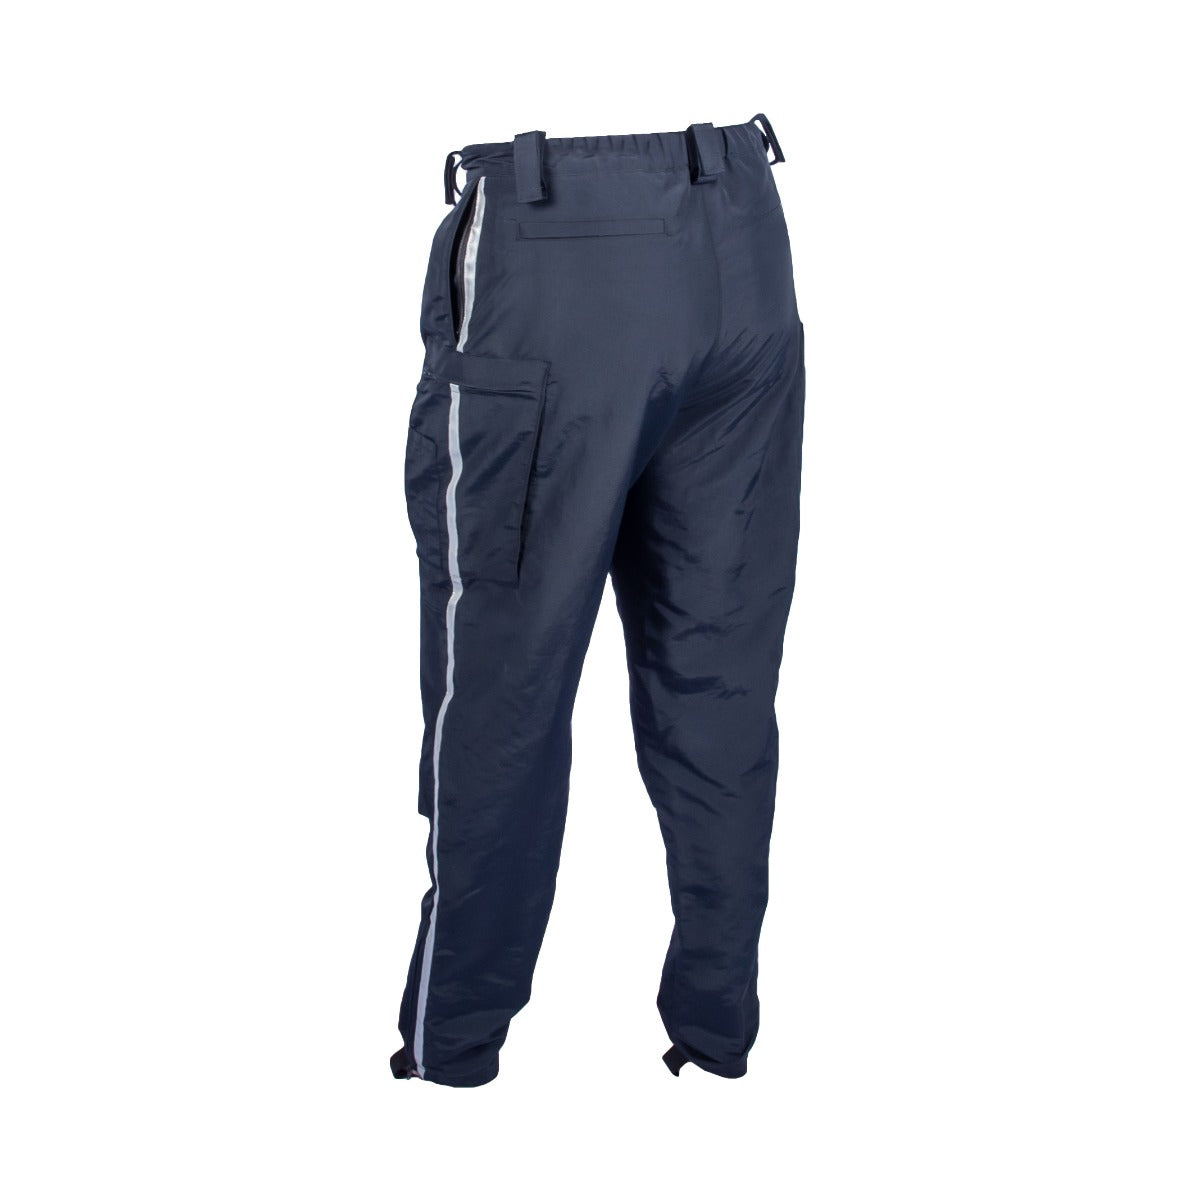 Supplex Cycling Pants w/ Reflective Tape at Side Seam - Sound Uniform  Solutions